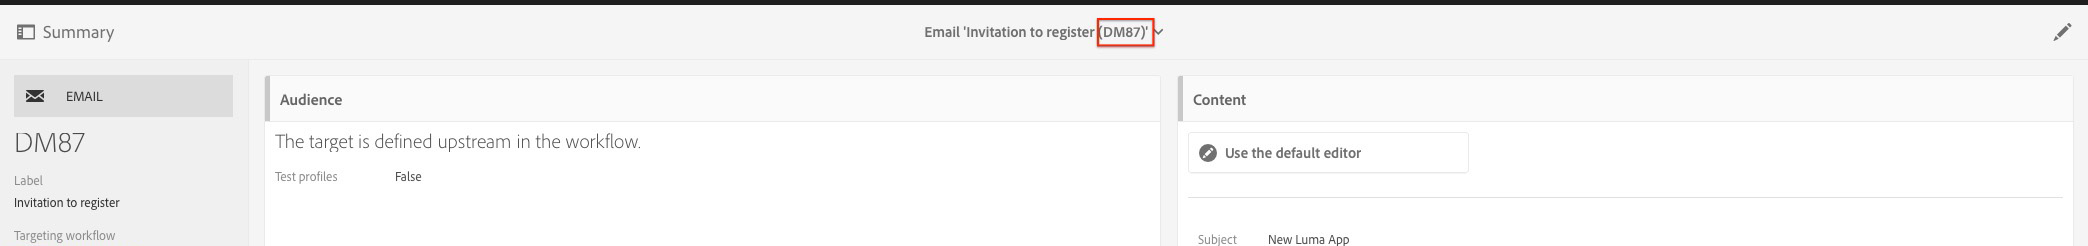 Figure 1.3.2: Email delivery ID